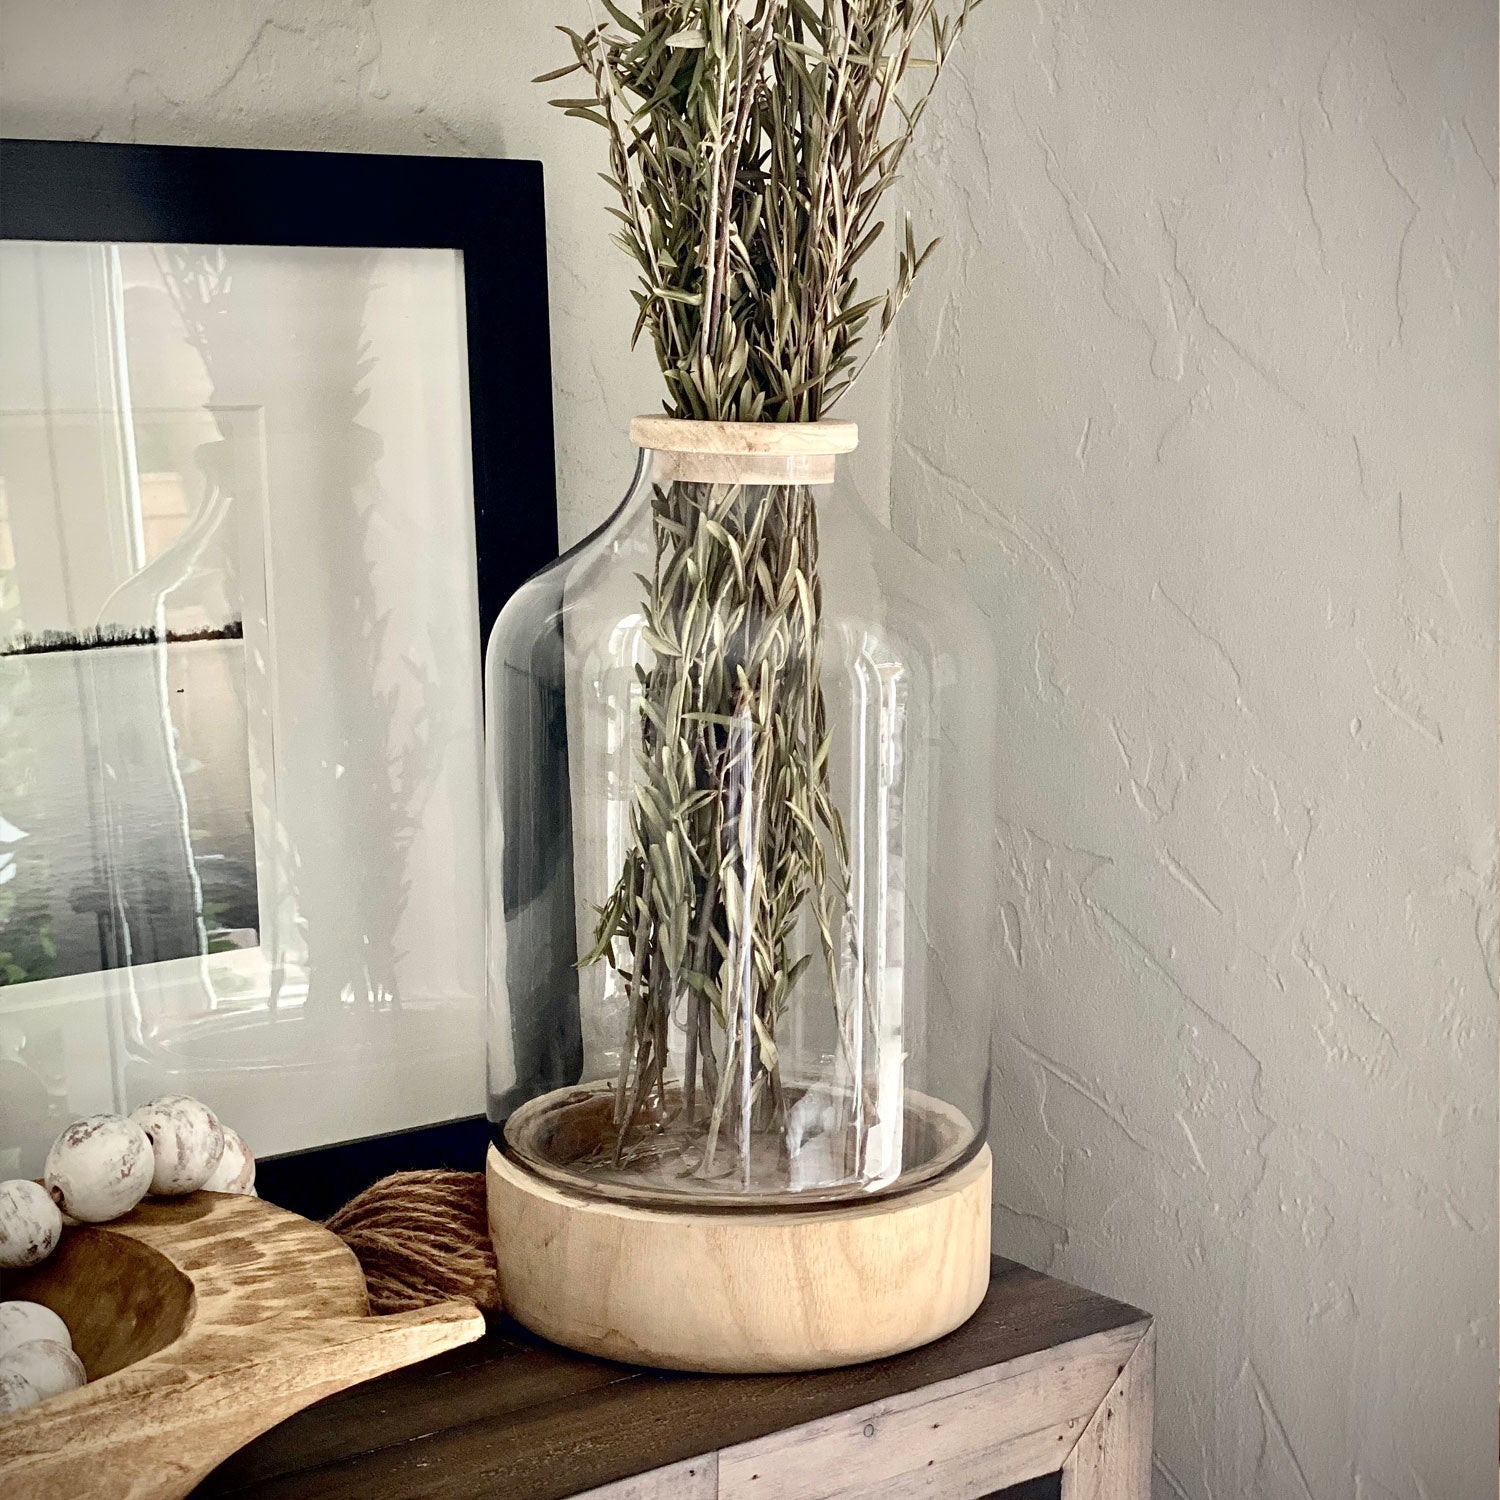 Let me be clear oversized glass vase with natural wood accents Galey Alix 